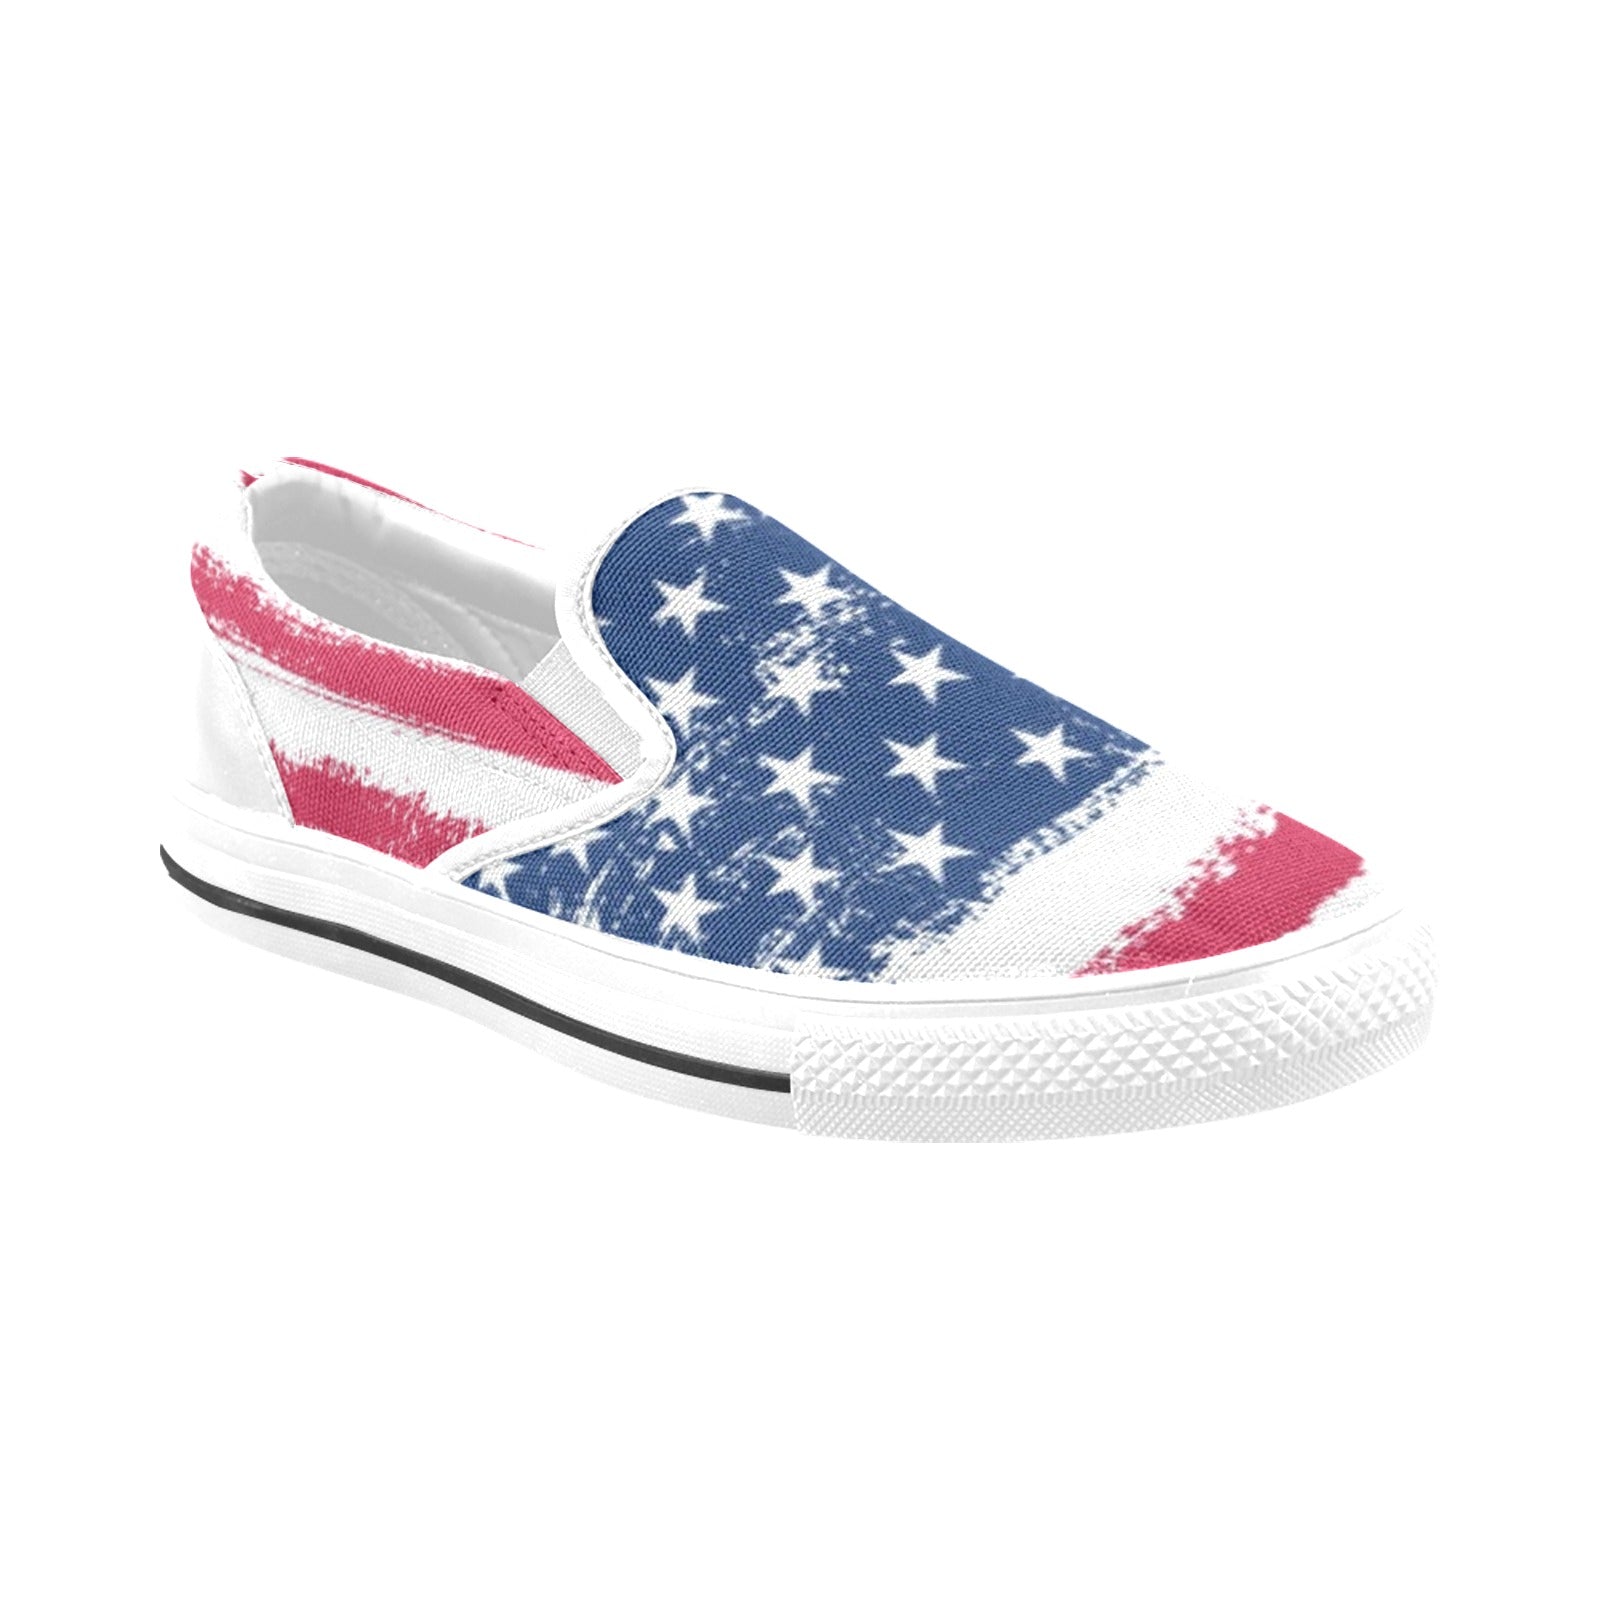 American Flag Women Shoes, Patriotic Red White Blue Mismatched Sneakers Stars and Stripes USA 4th of July Slip on Canvas Vegan Casual shoes Starcove Fashion